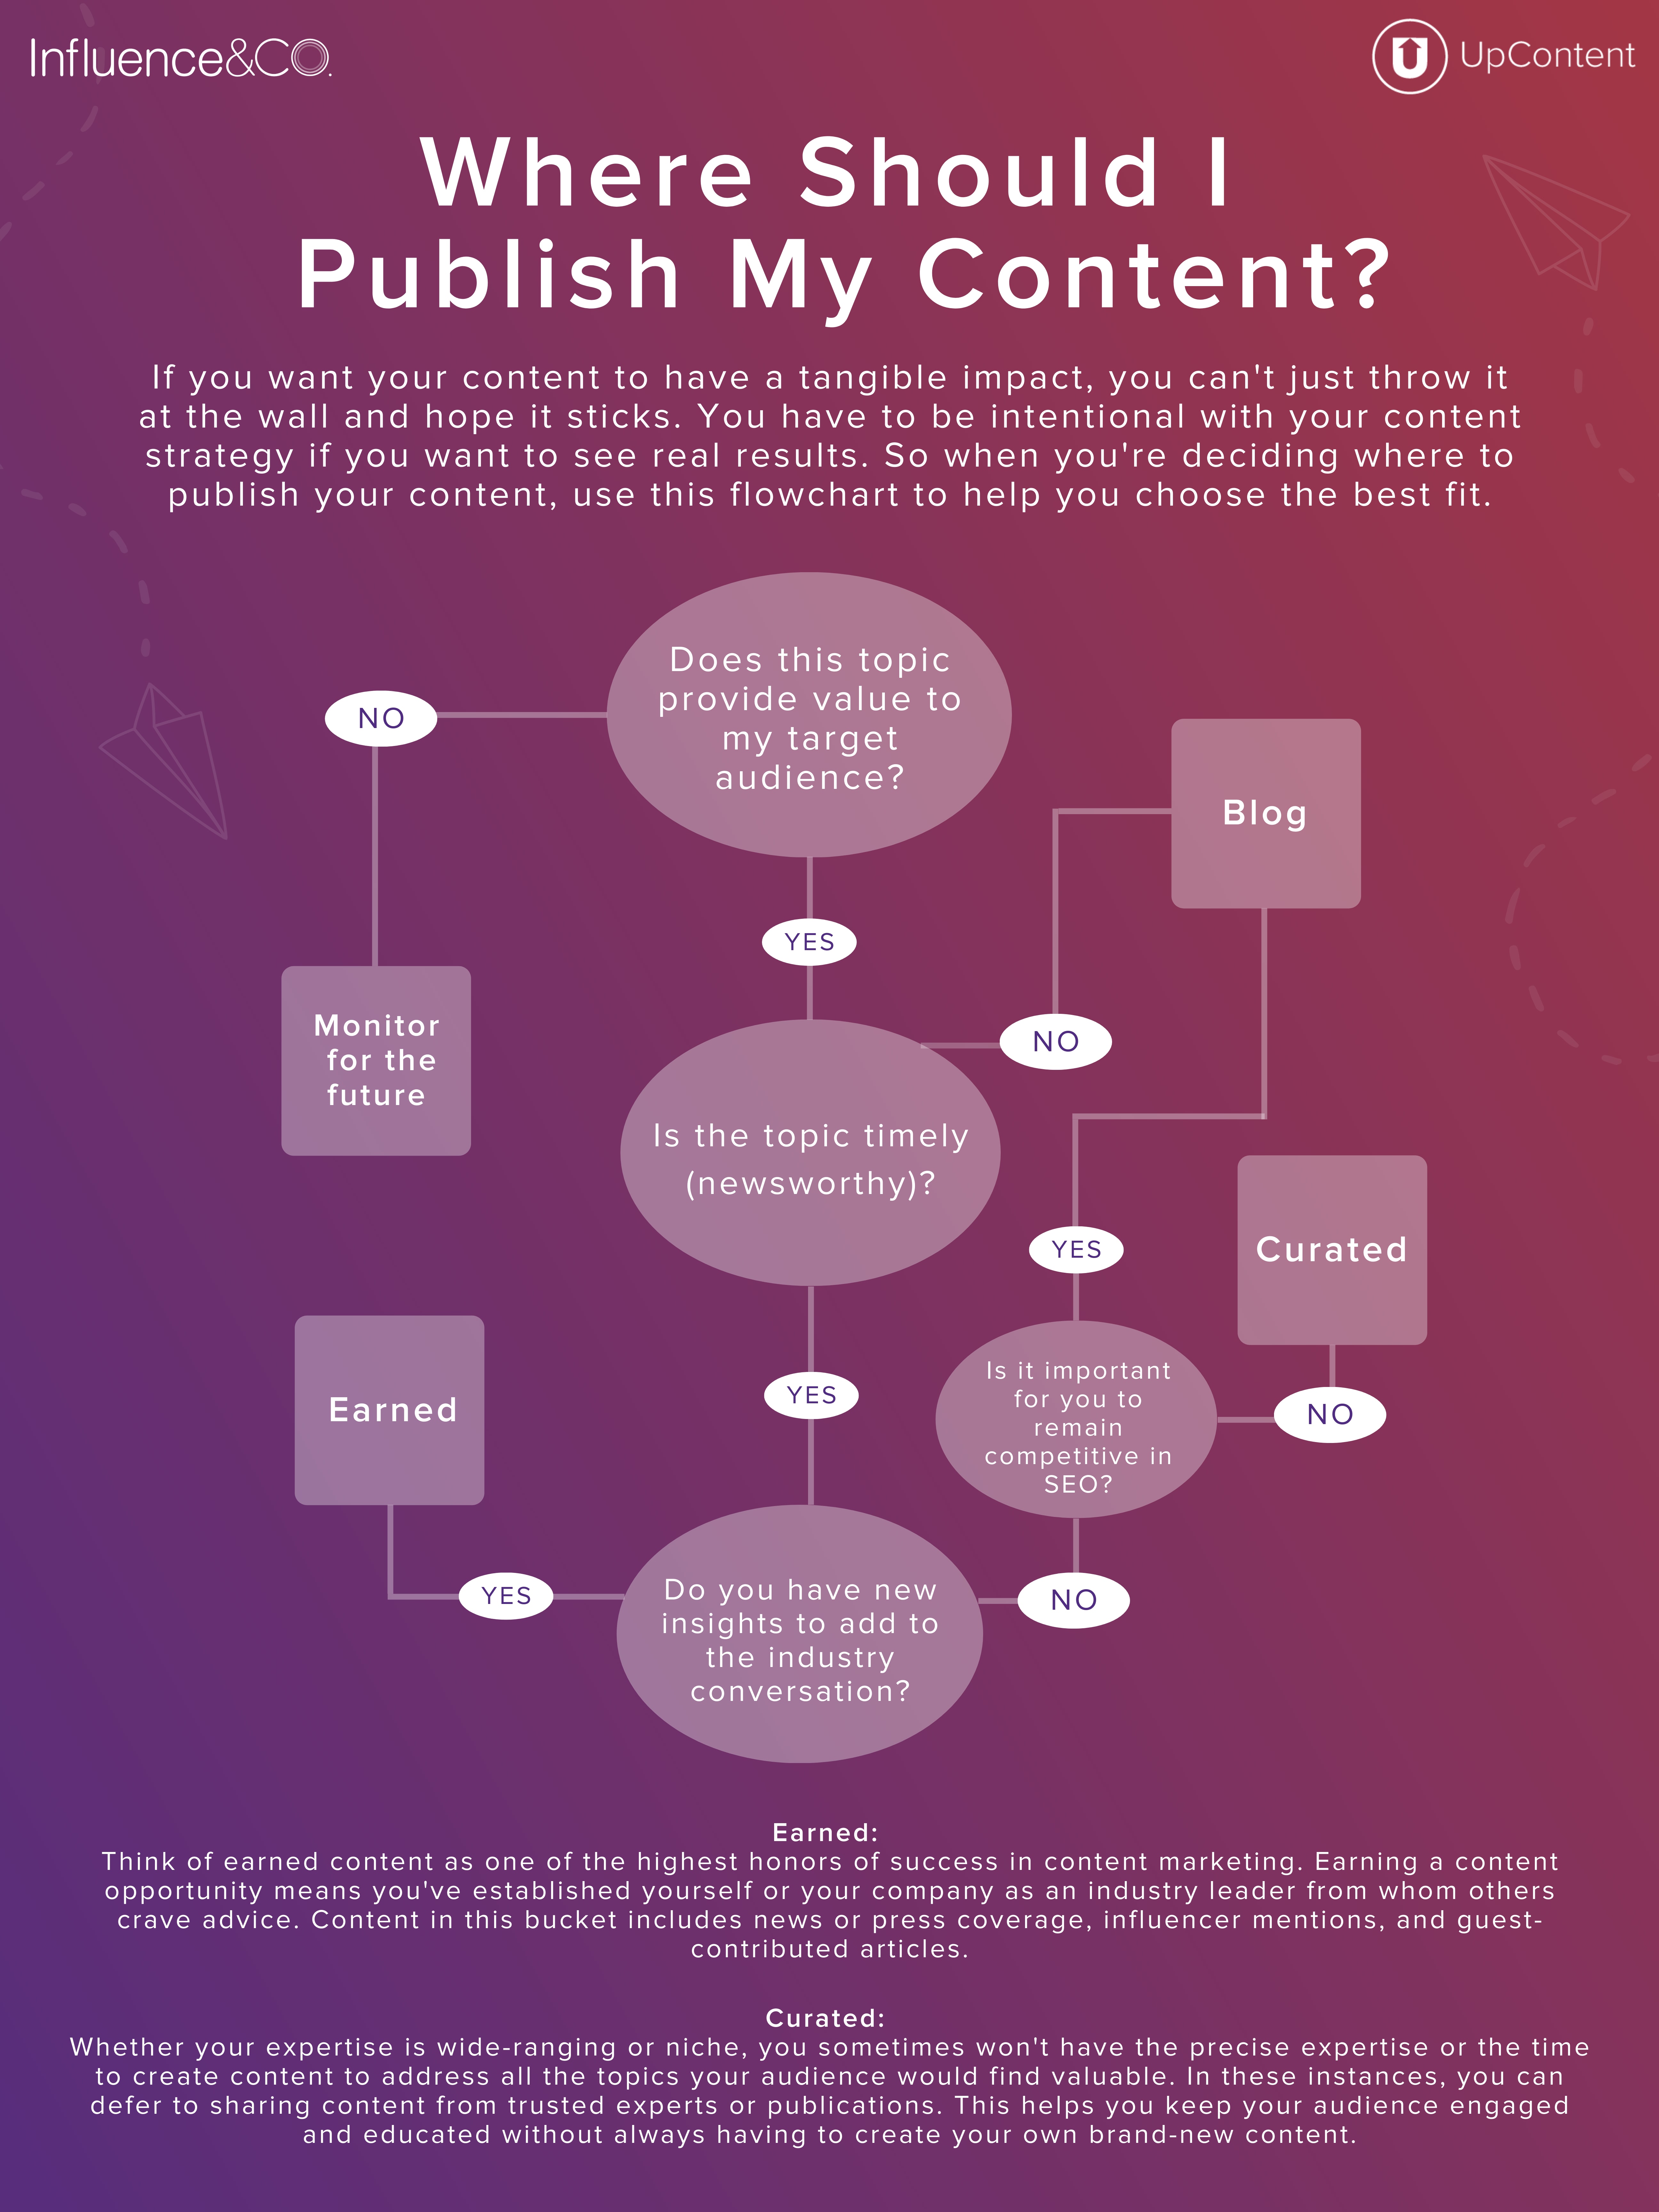 Where Should I Publish My Content Infographic